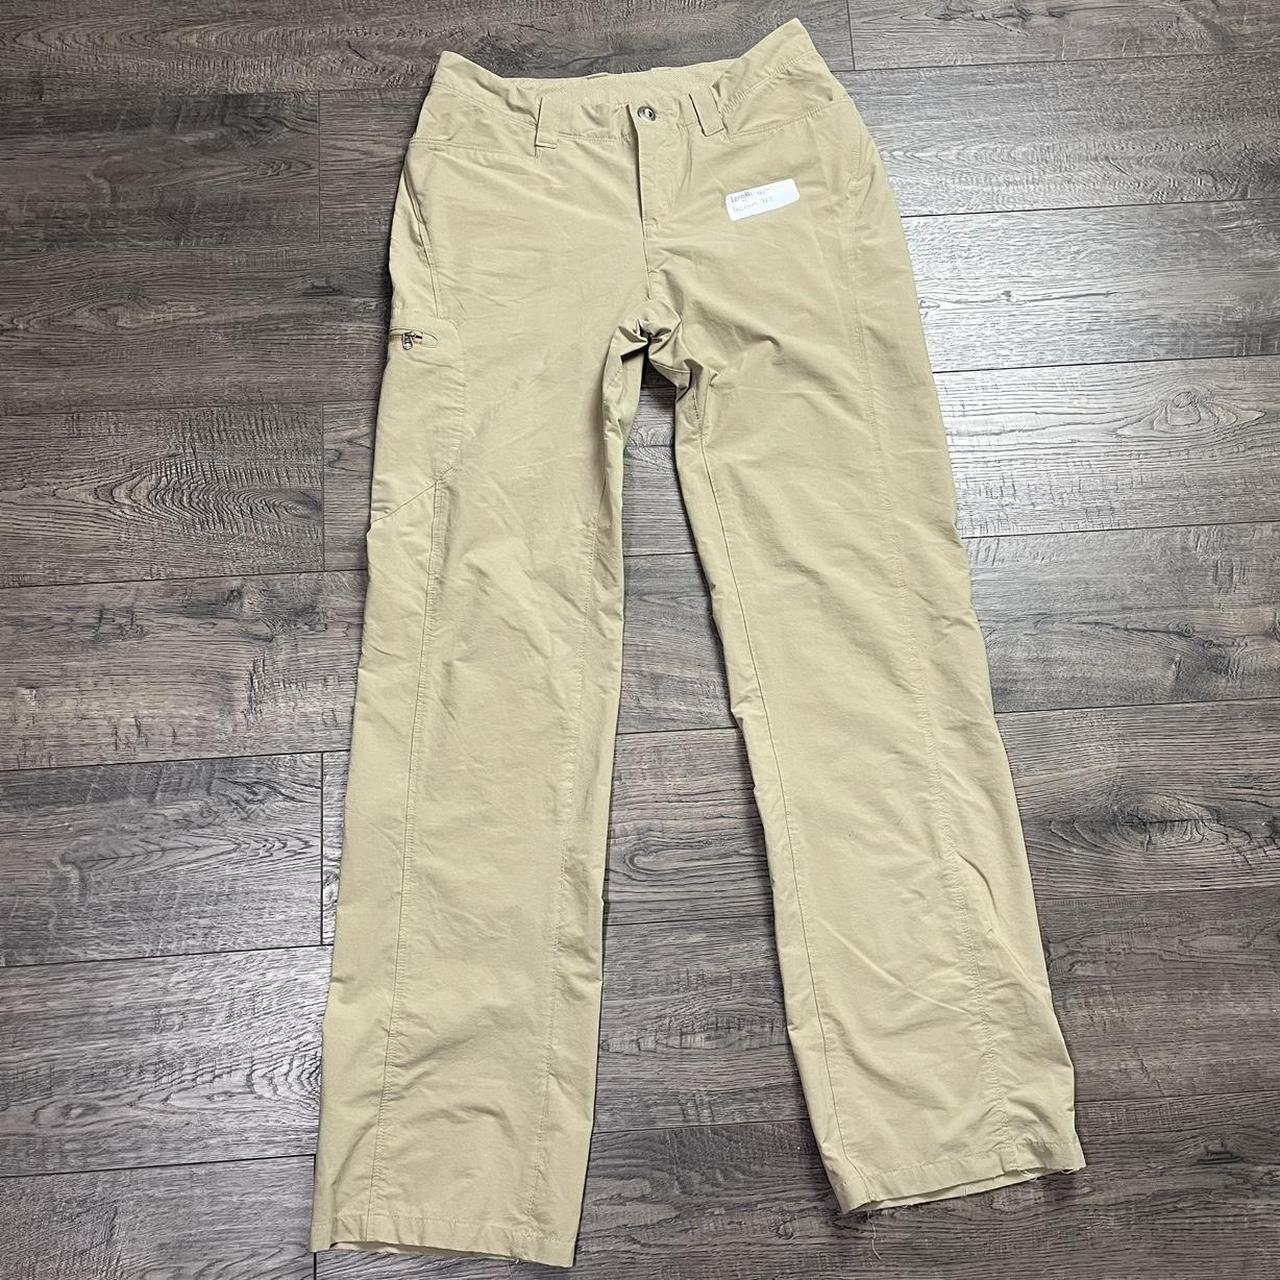 Womens Patagonia pants flaw pictured size 4... - Depop